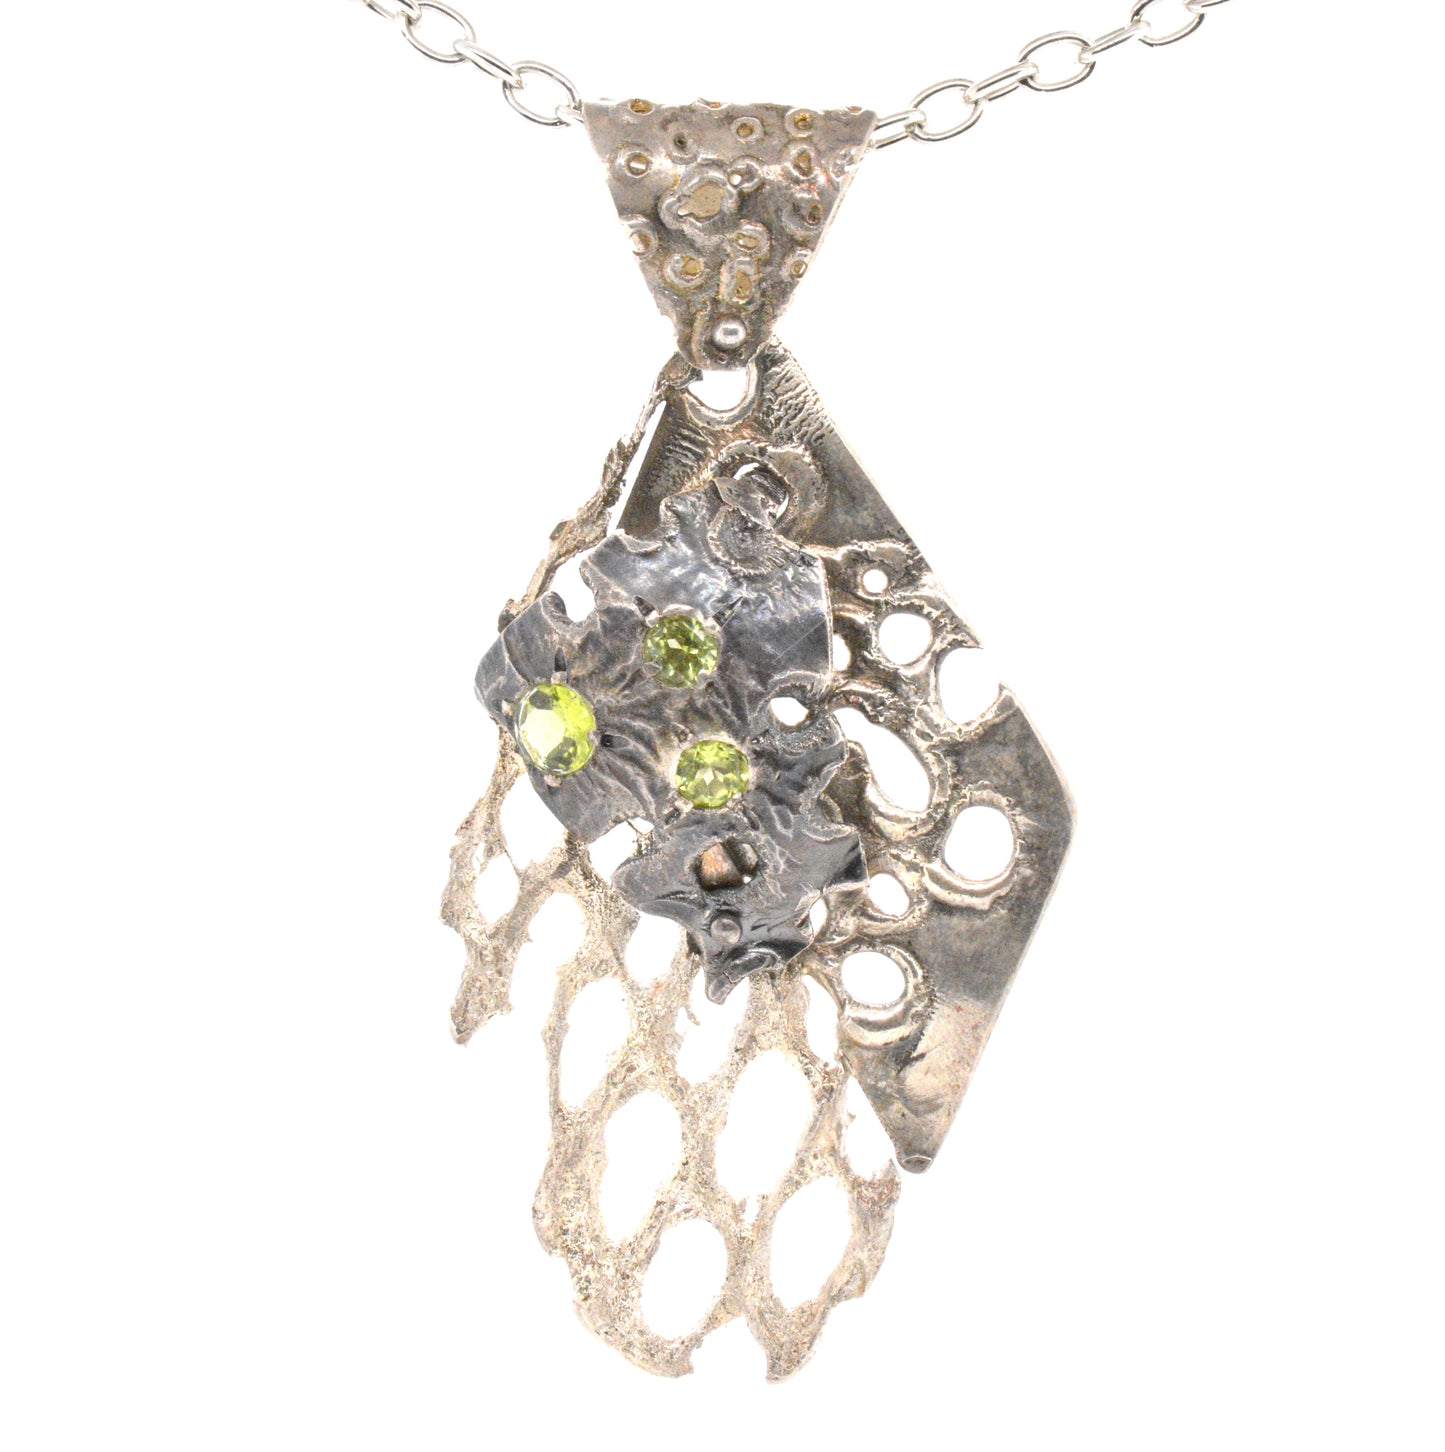 Hand Crafted Sterling Silver With Petina'd Sterling Silver And Peridot Stones Pendant